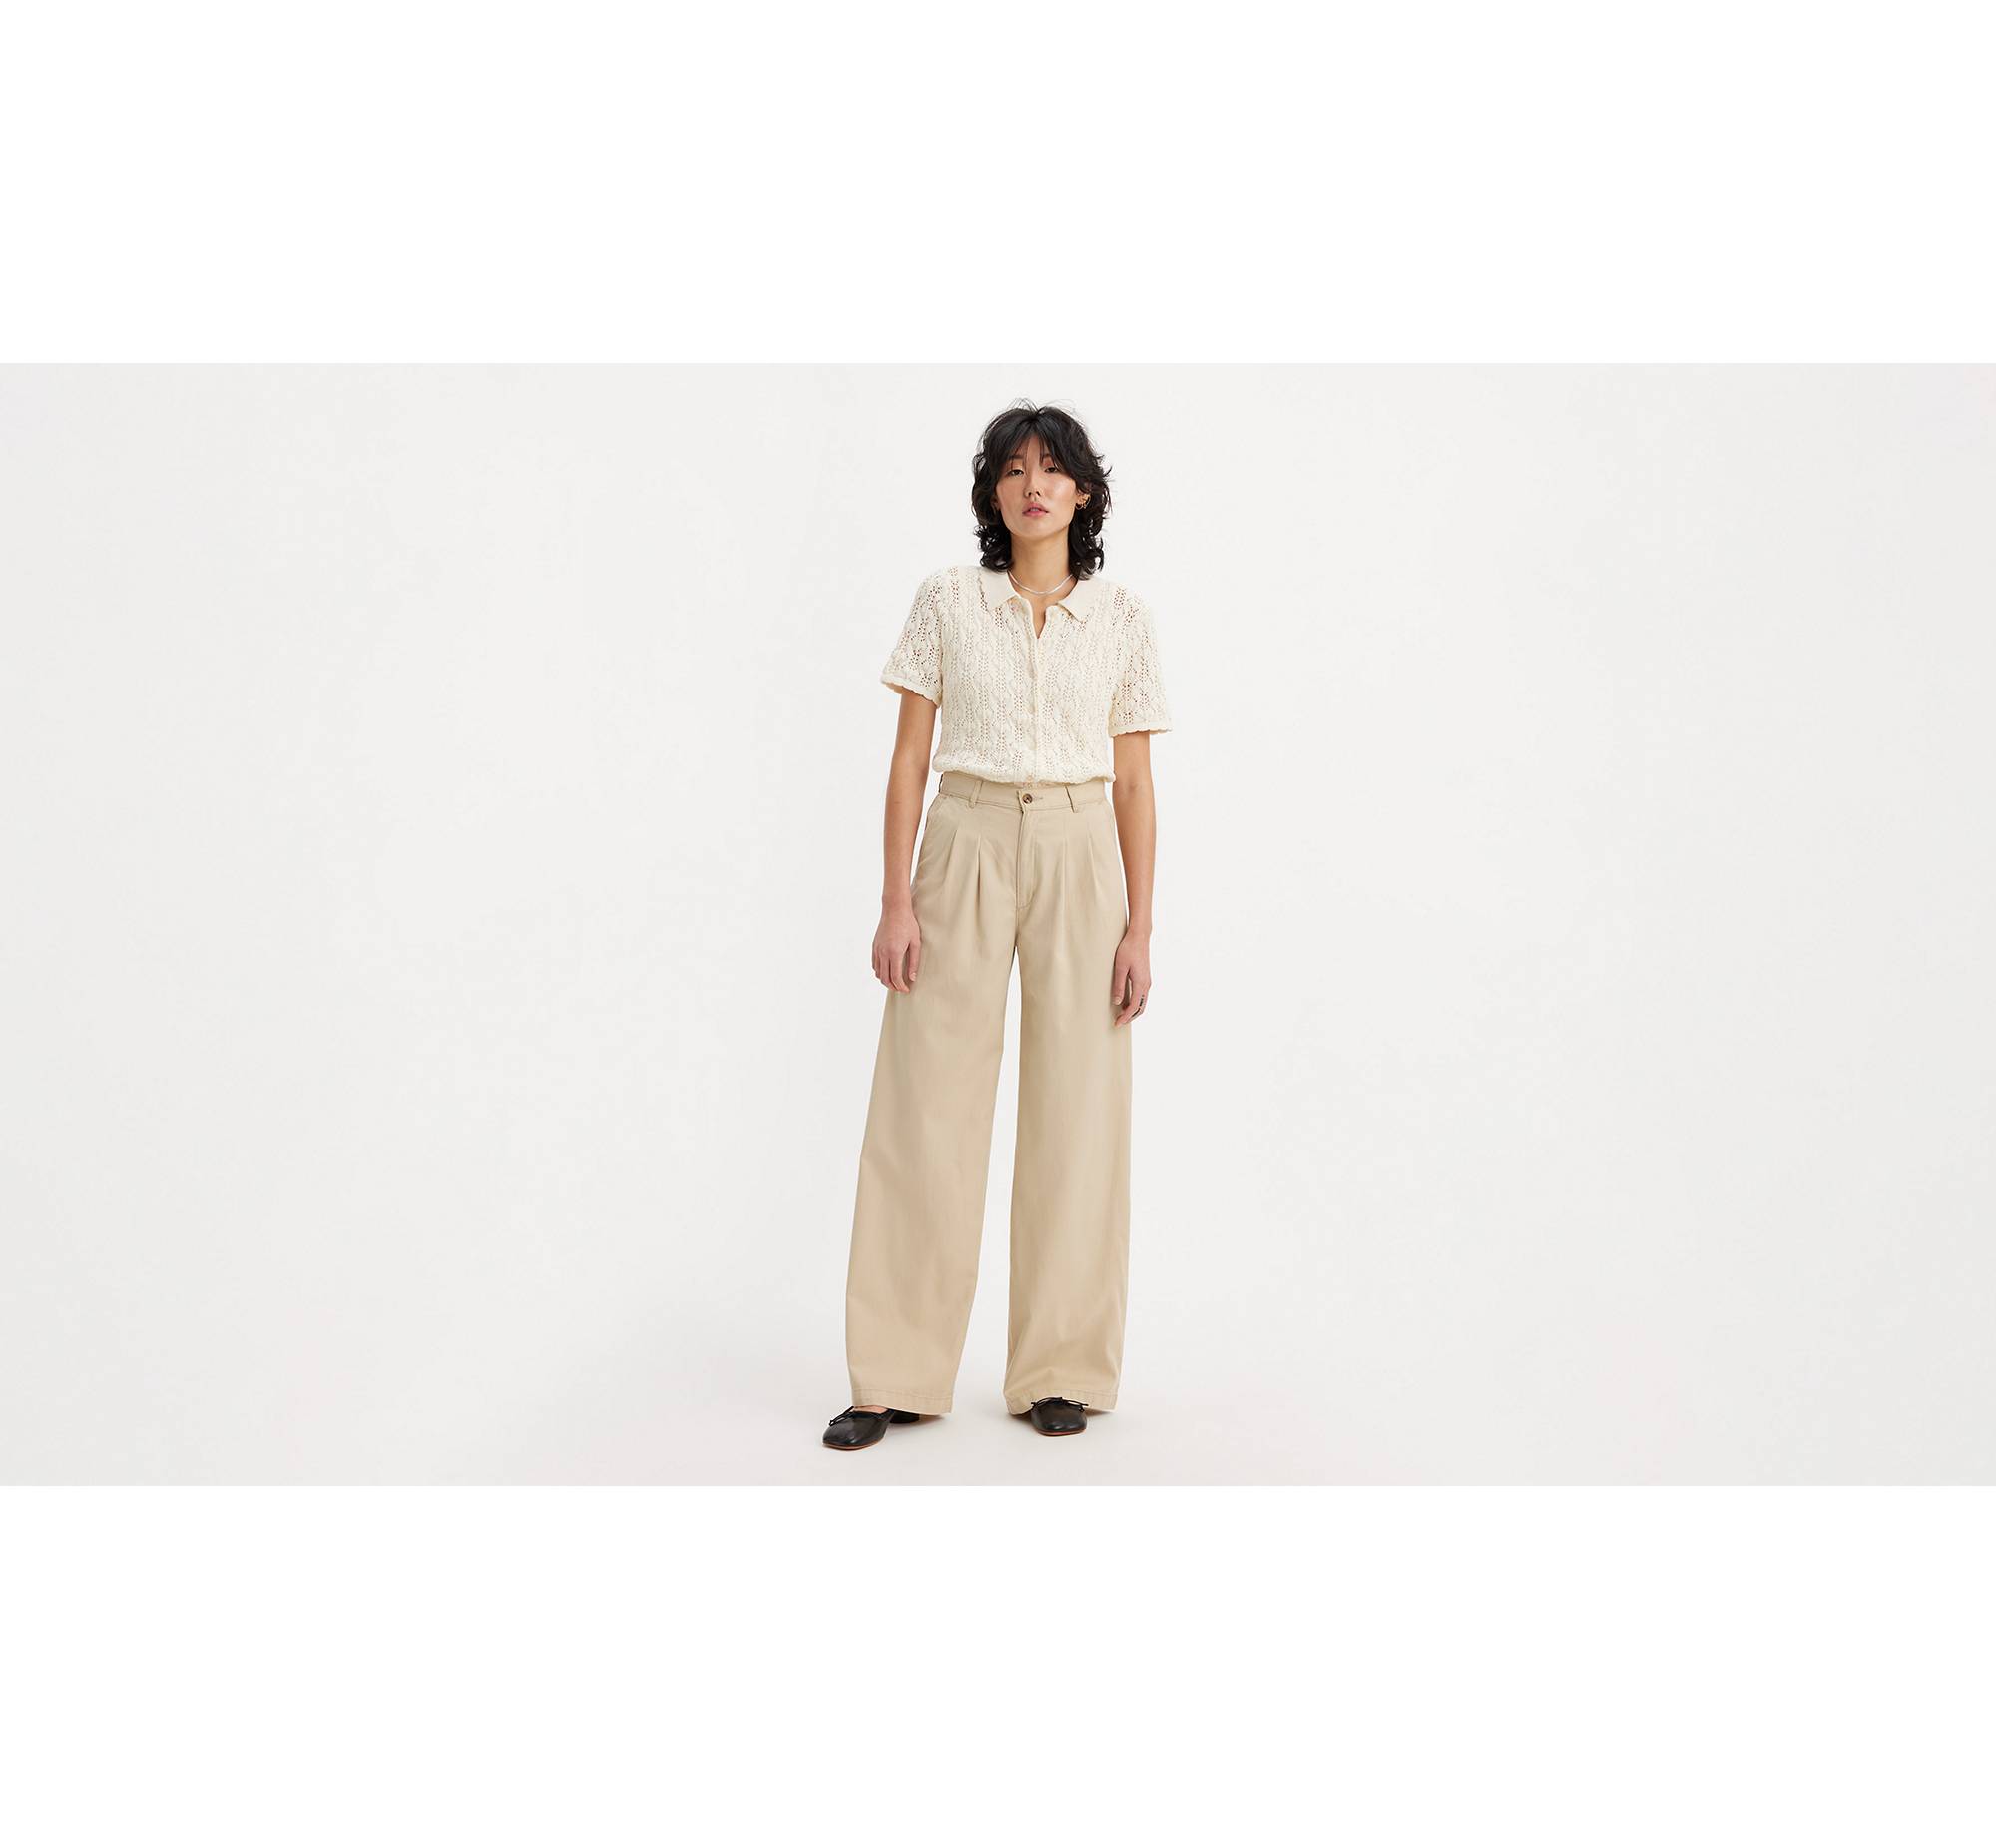 Skrfez Women's Wide Leg Pants with Pockets Lounge Beige Small High